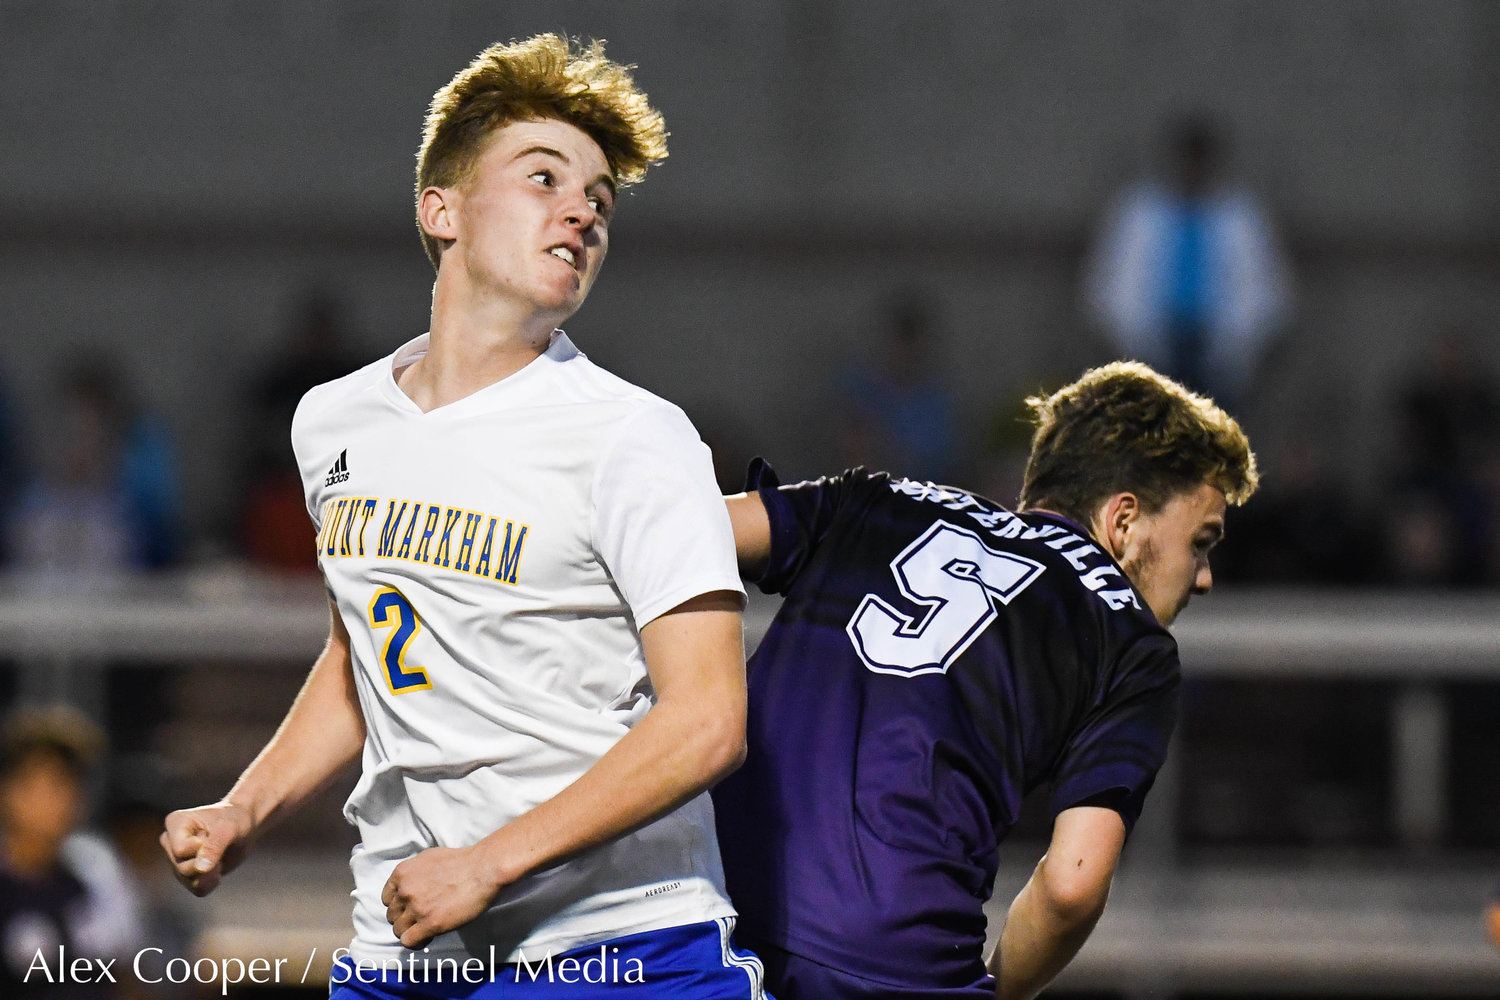 Mt. Markham player Ryan Denton (2) heads the ball forward against Waterville player Braeden (5) during the Class C boys soccer semifinals on Wednesday, Oct. 26 at Canastota. Waterville won 2-1.